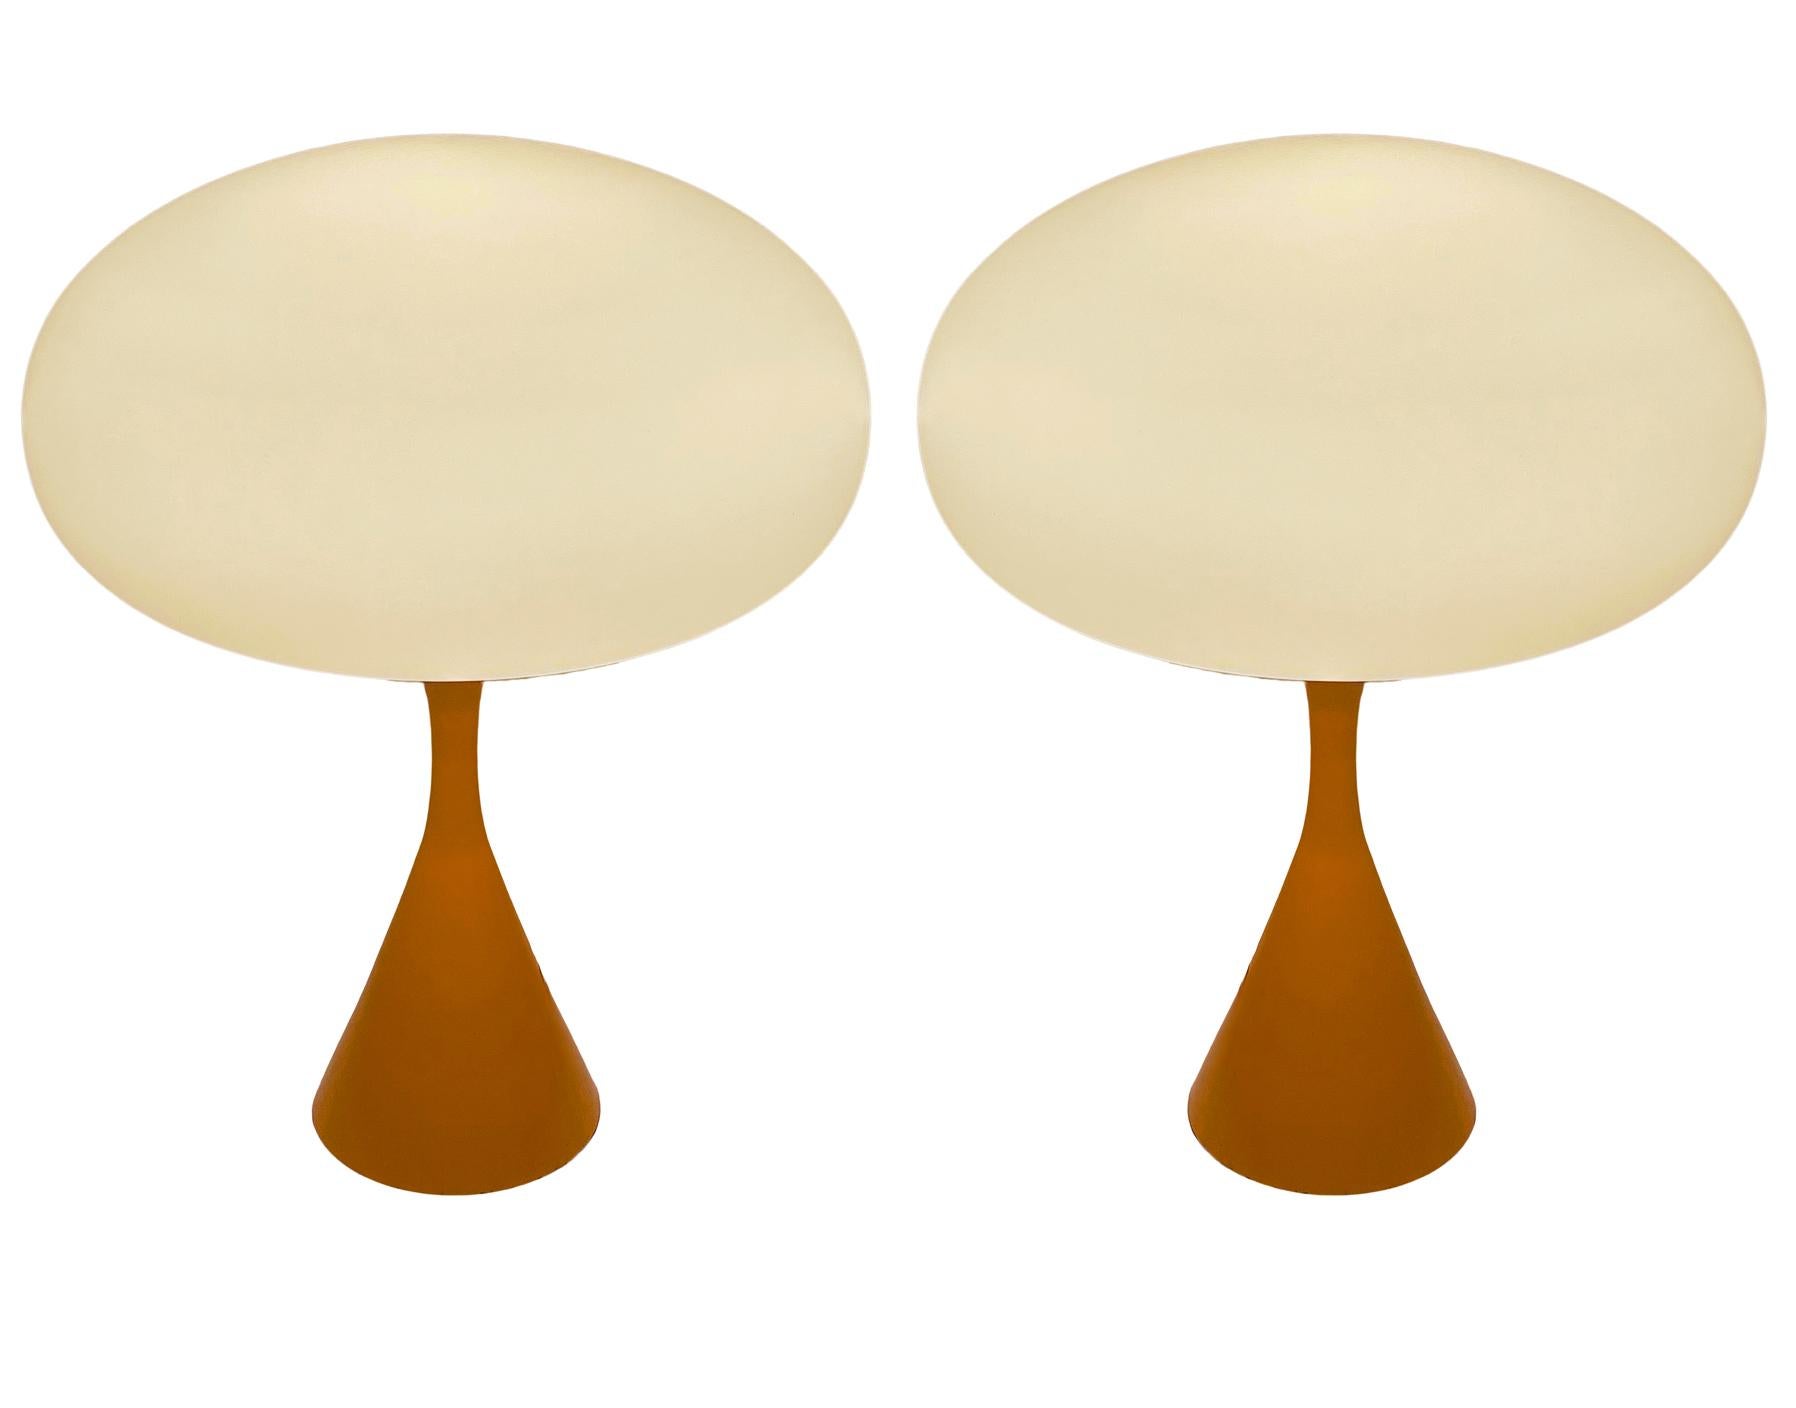 Pair of Mid-Century Modern Table Lamps by Designline in Orange & White Glass In New Condition For Sale In Philadelphia, PA